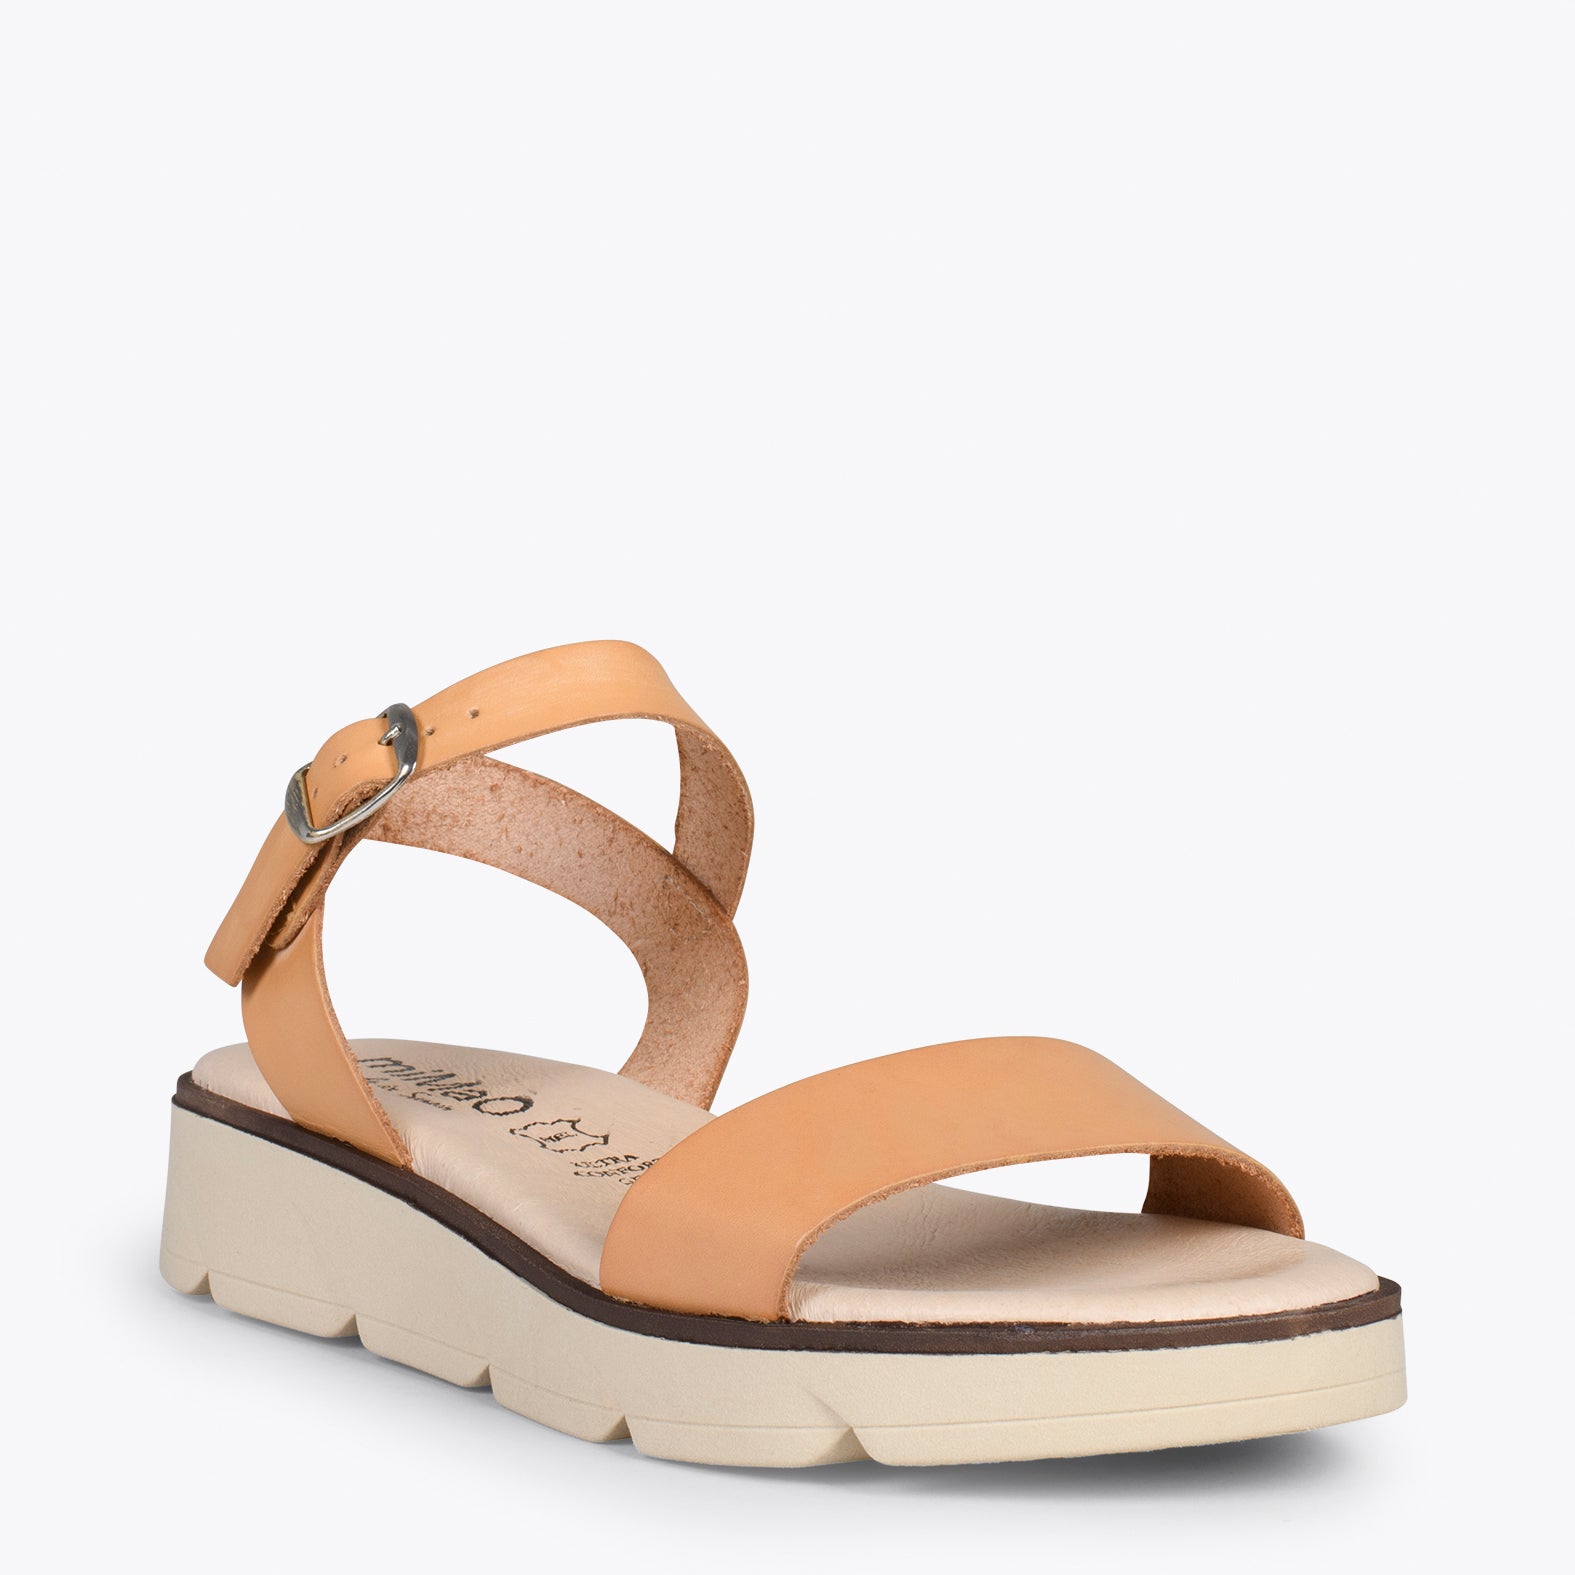 RIVER – BEIGE leather flat sandals with wedge